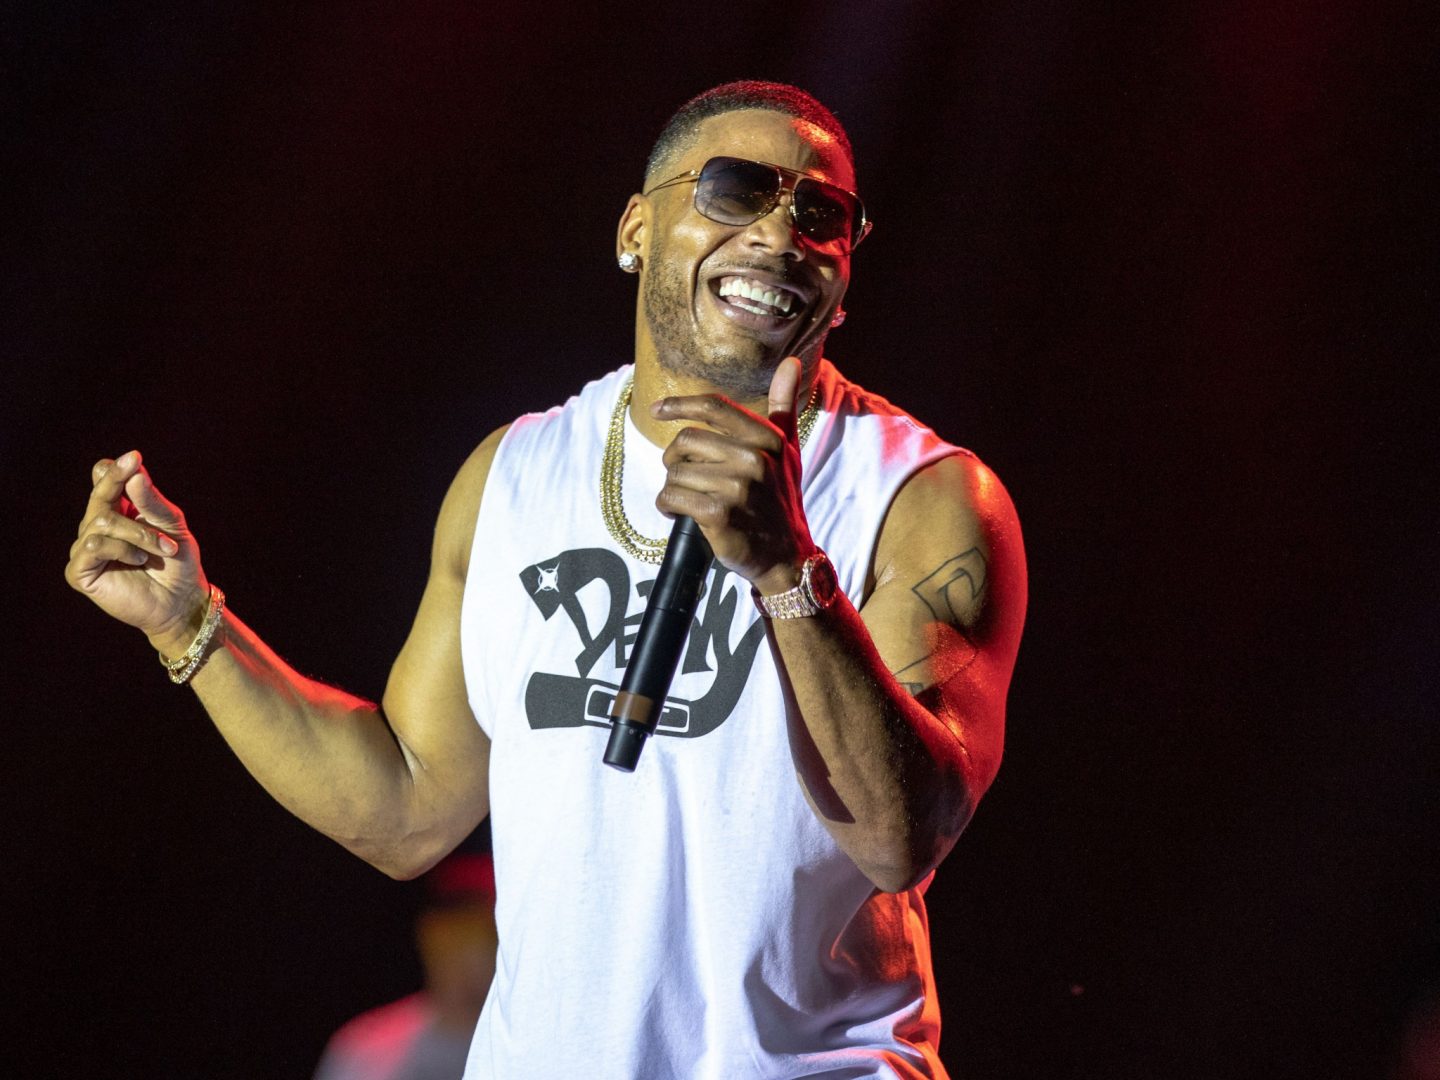 Nelly and BBD set to perform medleys at the 2020 American Music Awards